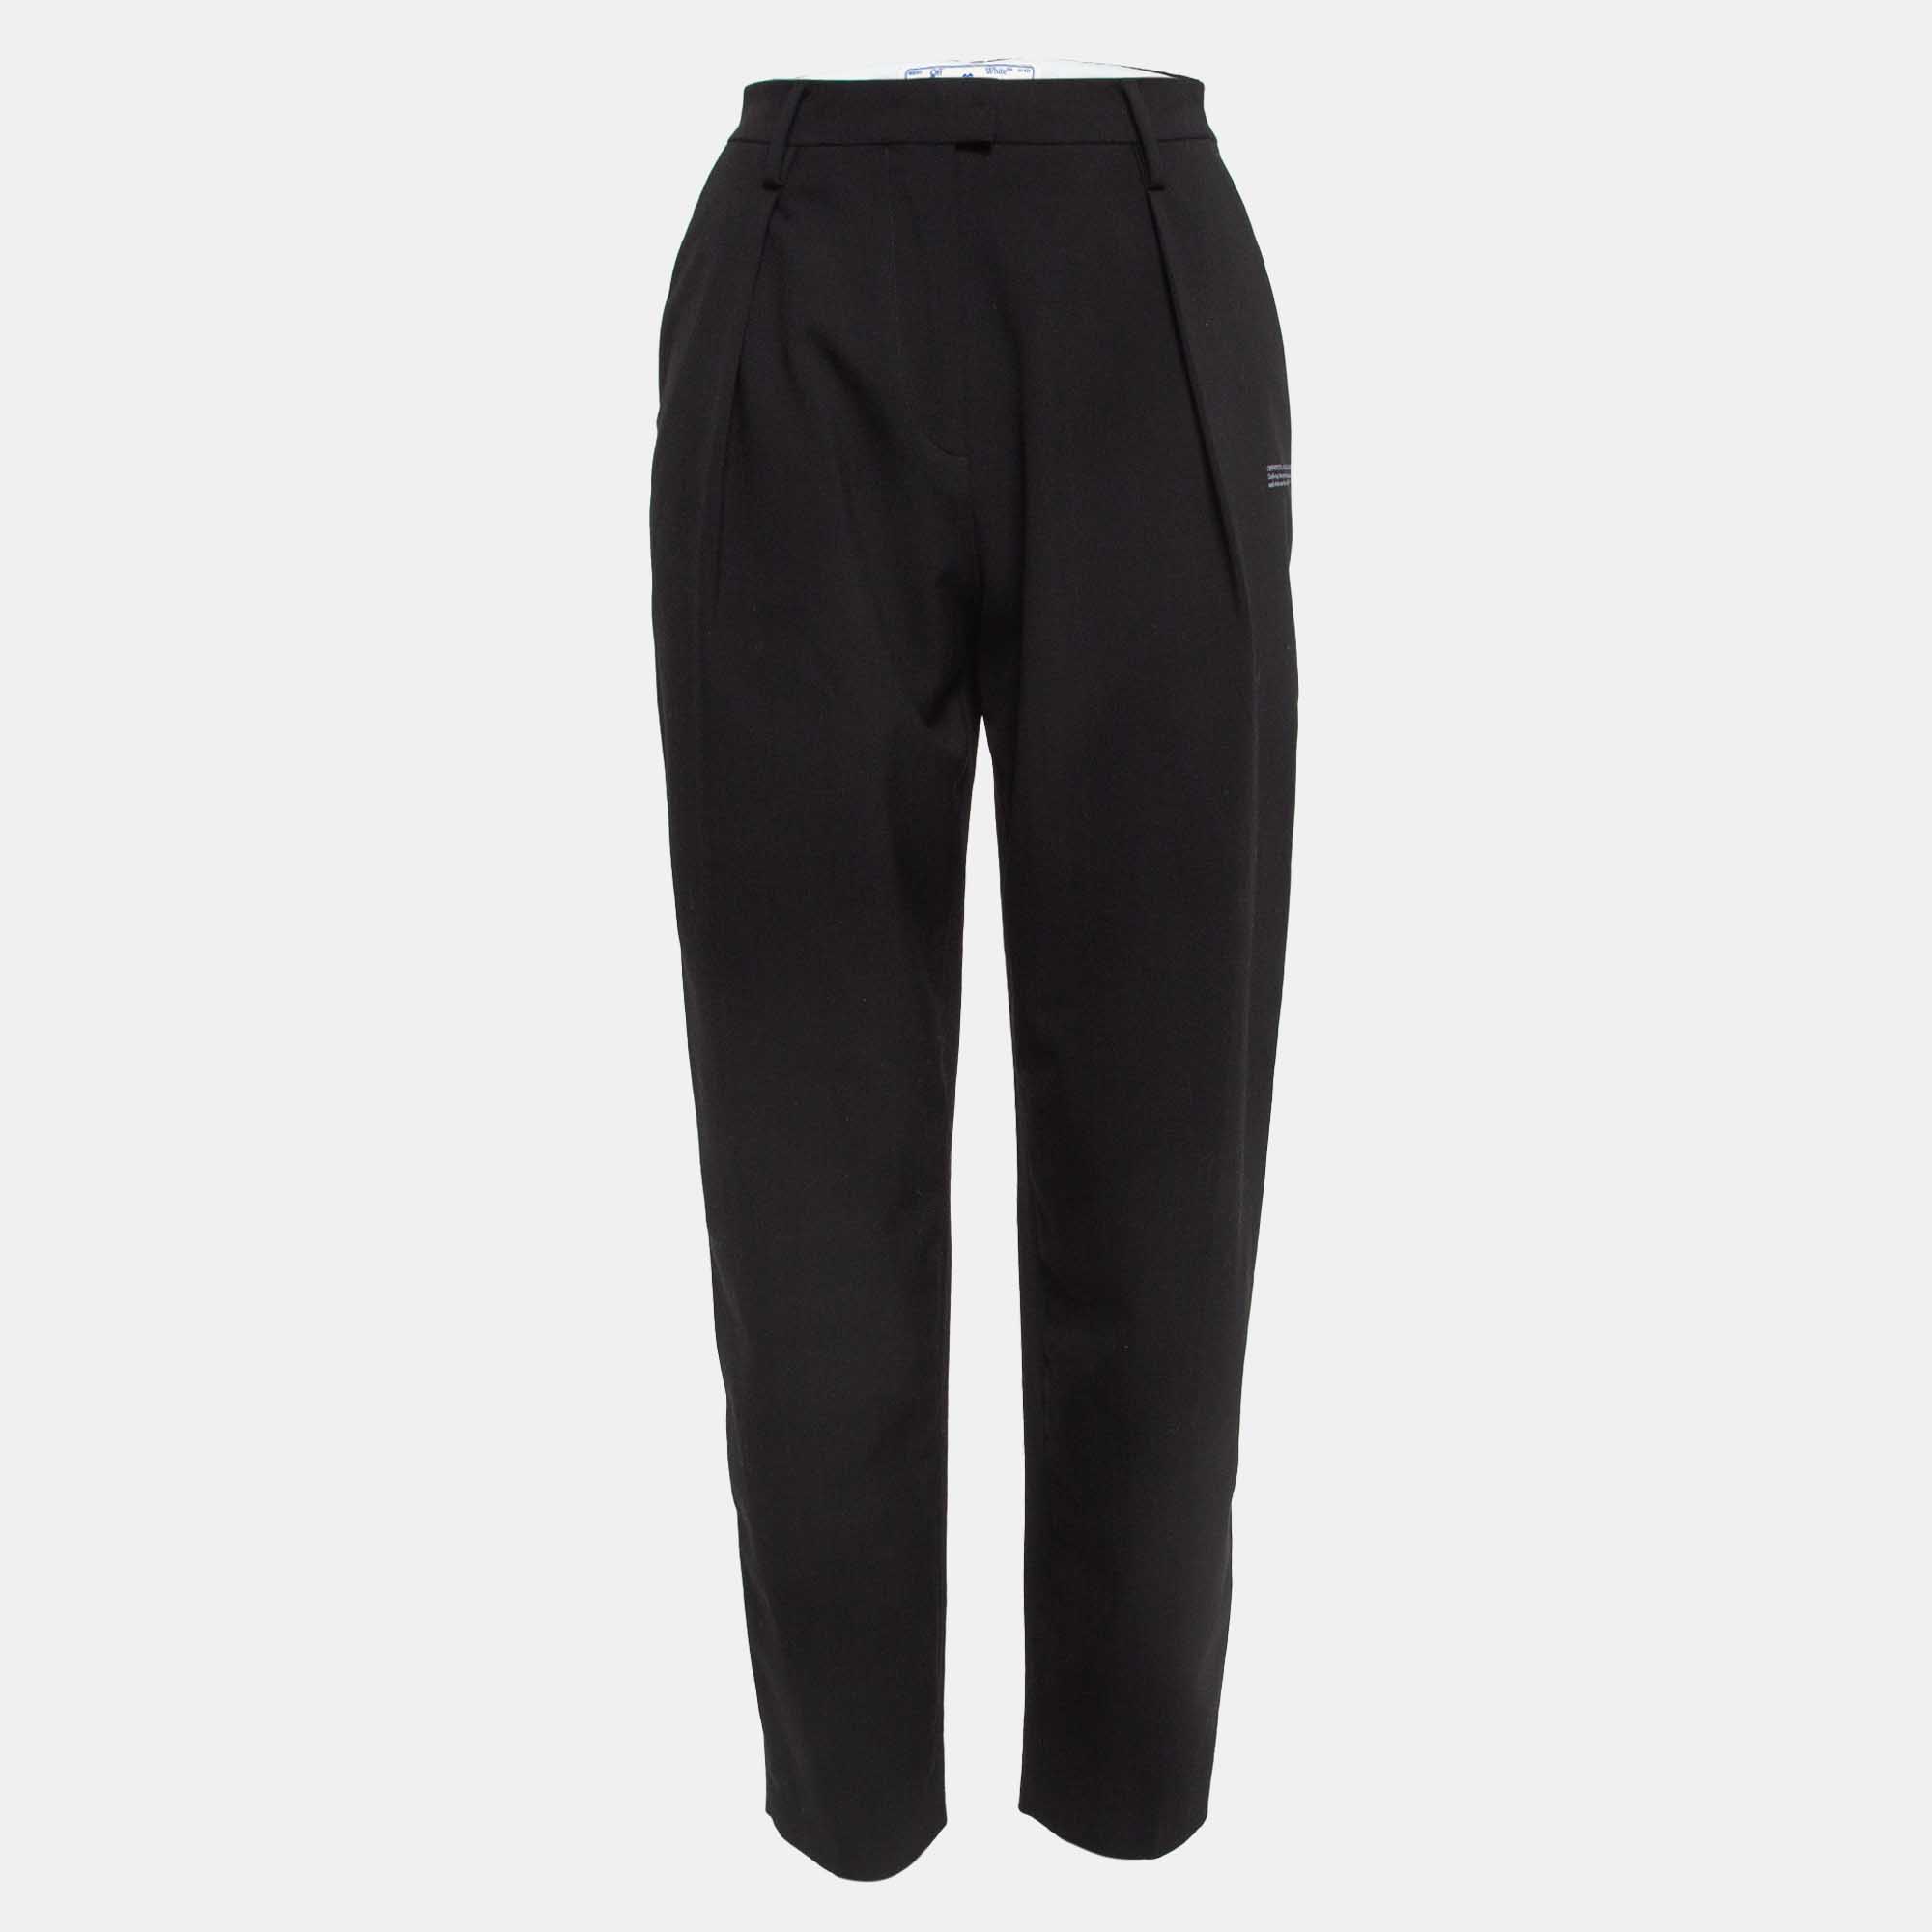 Off-white black printed twill tapered formal trousers s